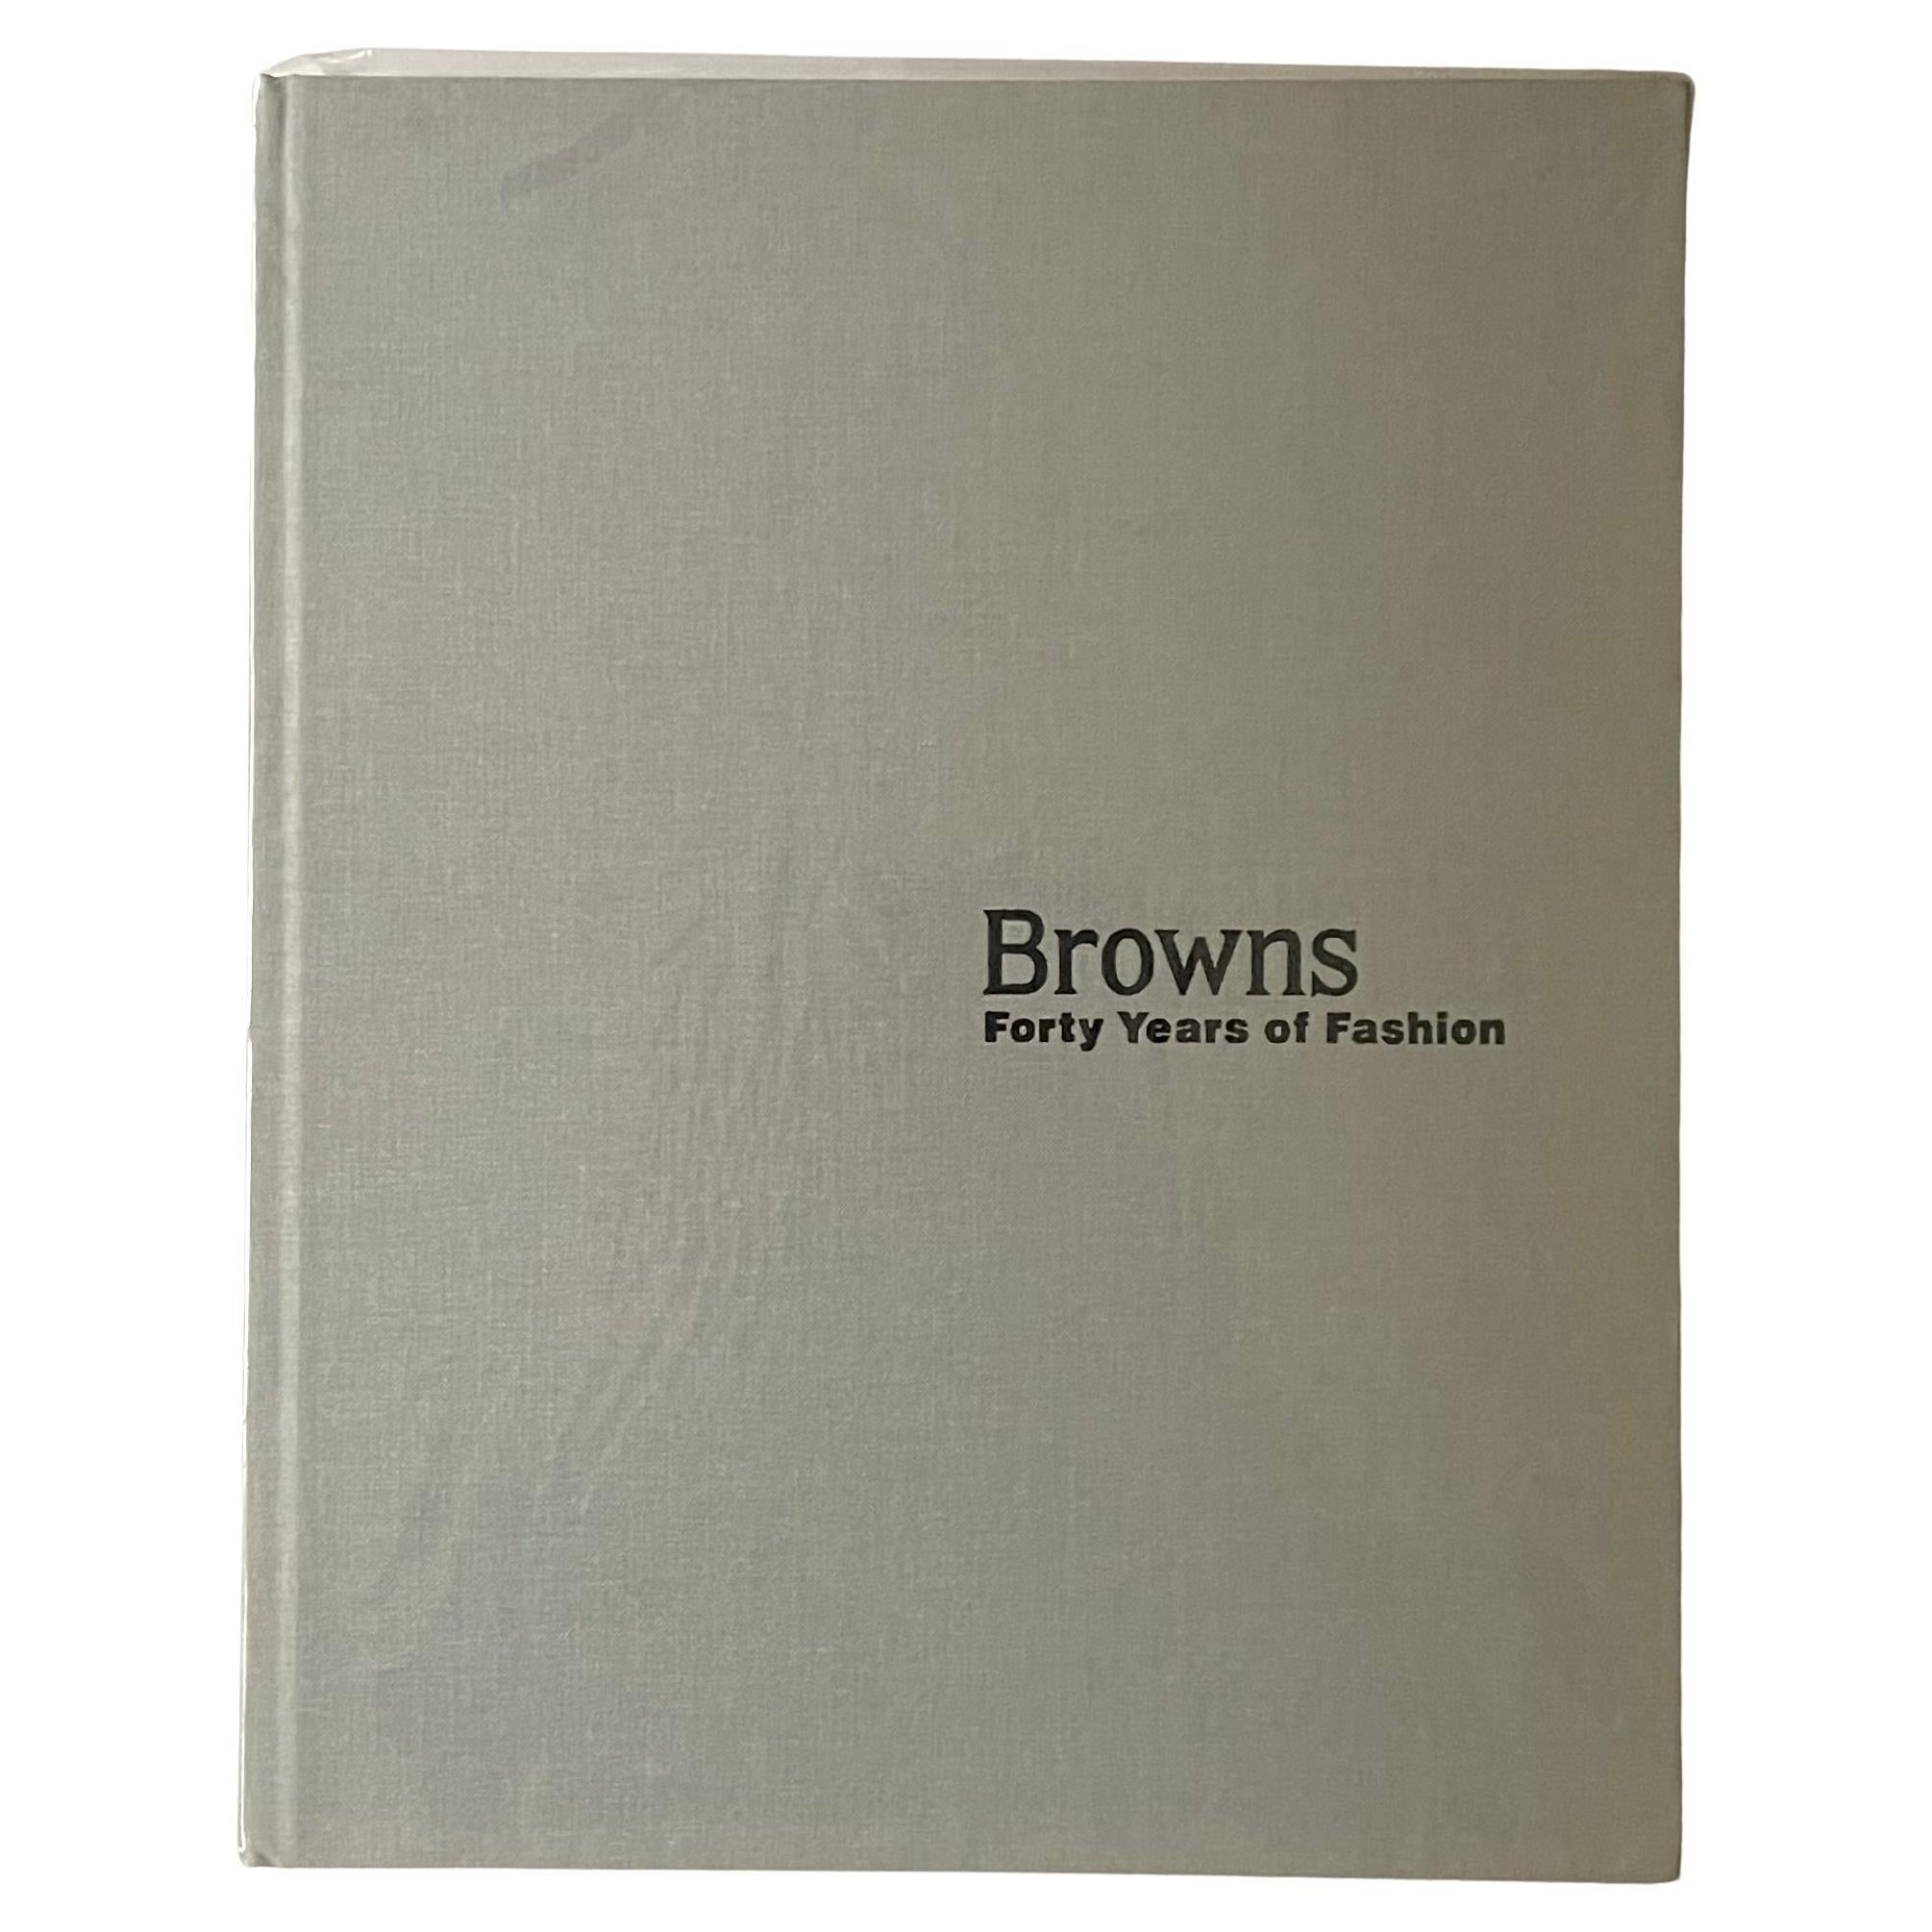 Browns : Forty Years of Fashion, 1ère édition, Londres, 2010